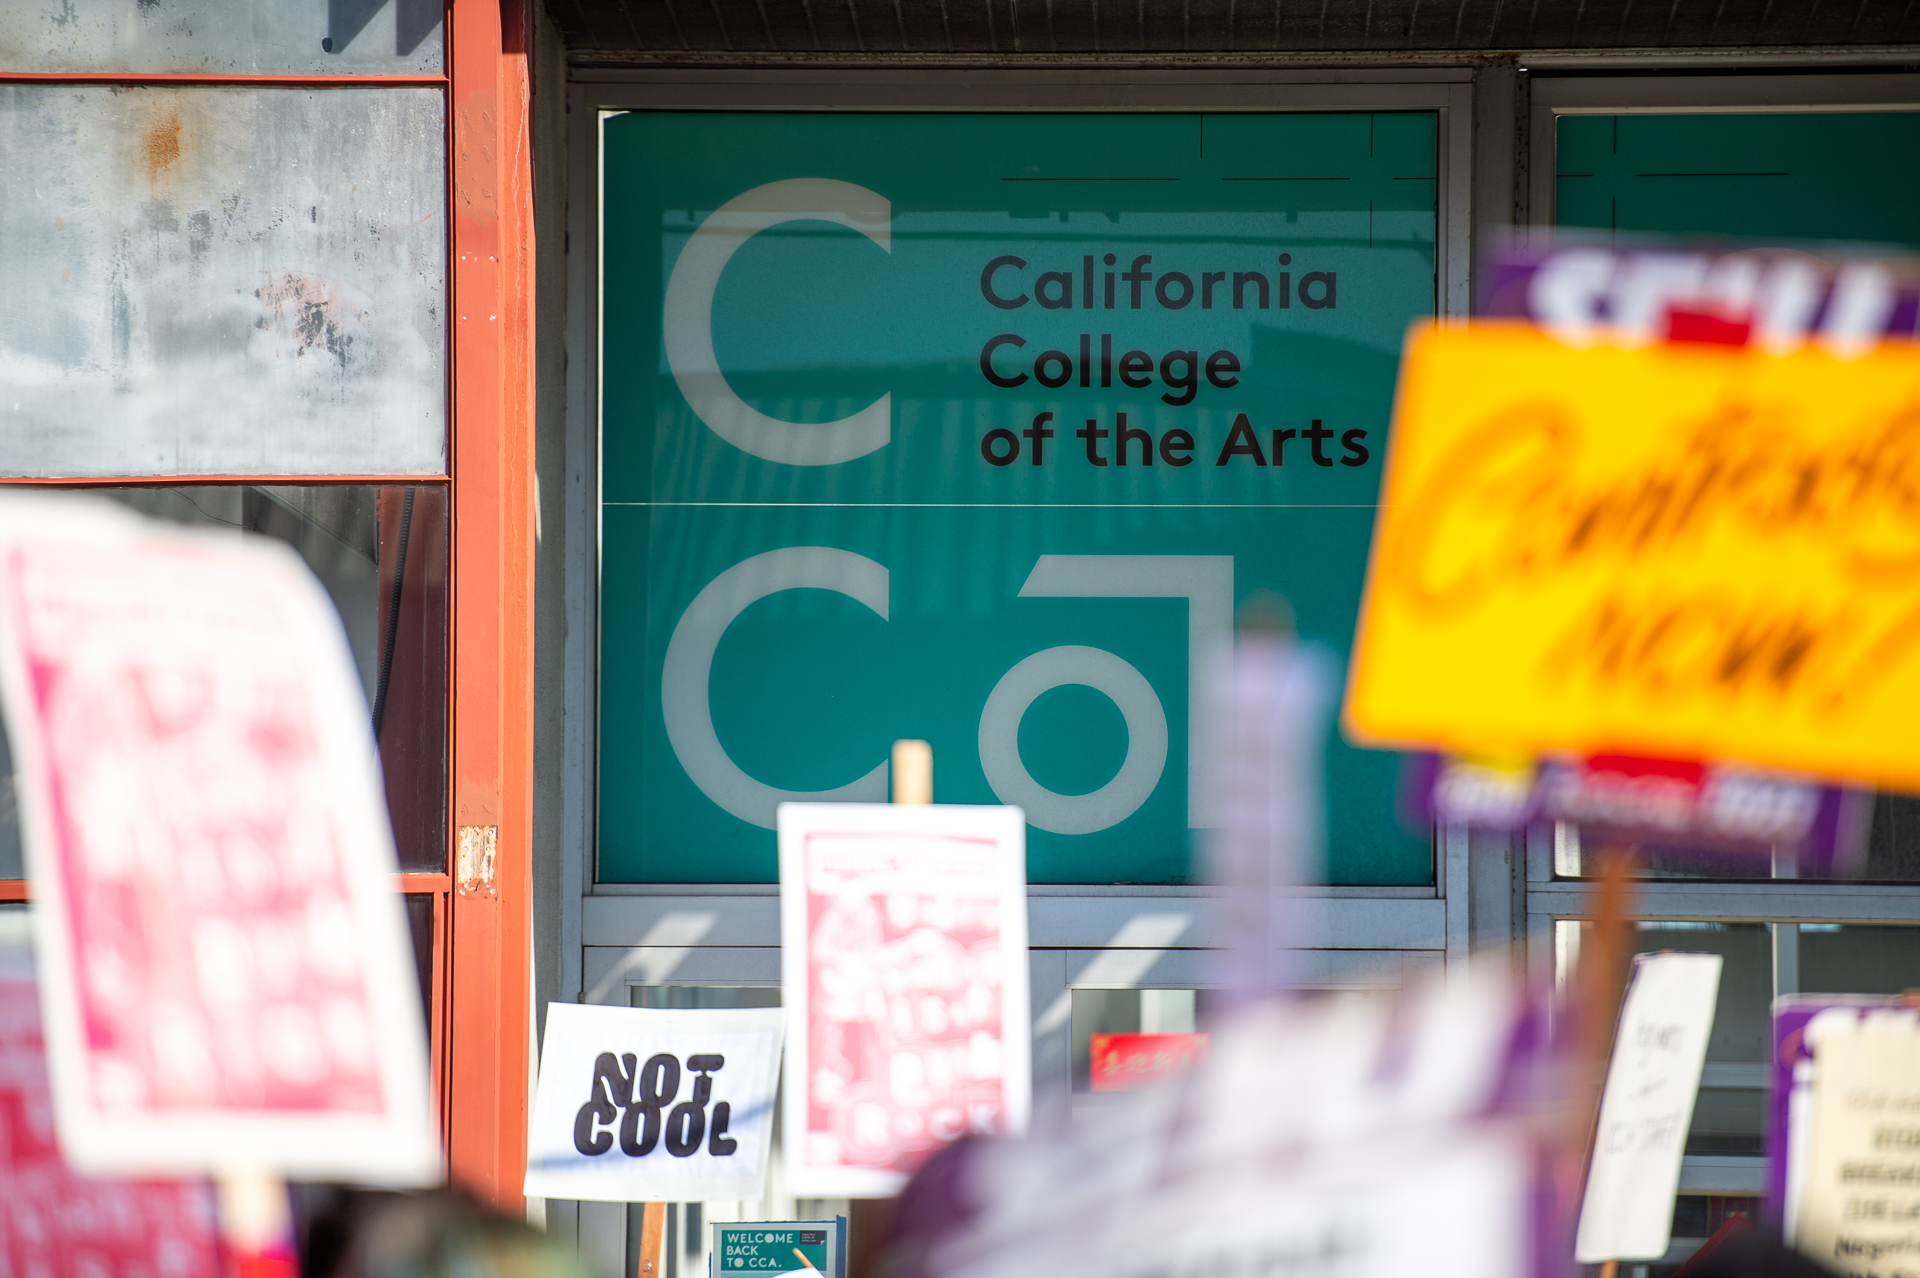 Picket signs read "not cool" and "contracts now" in front of a CCA logo